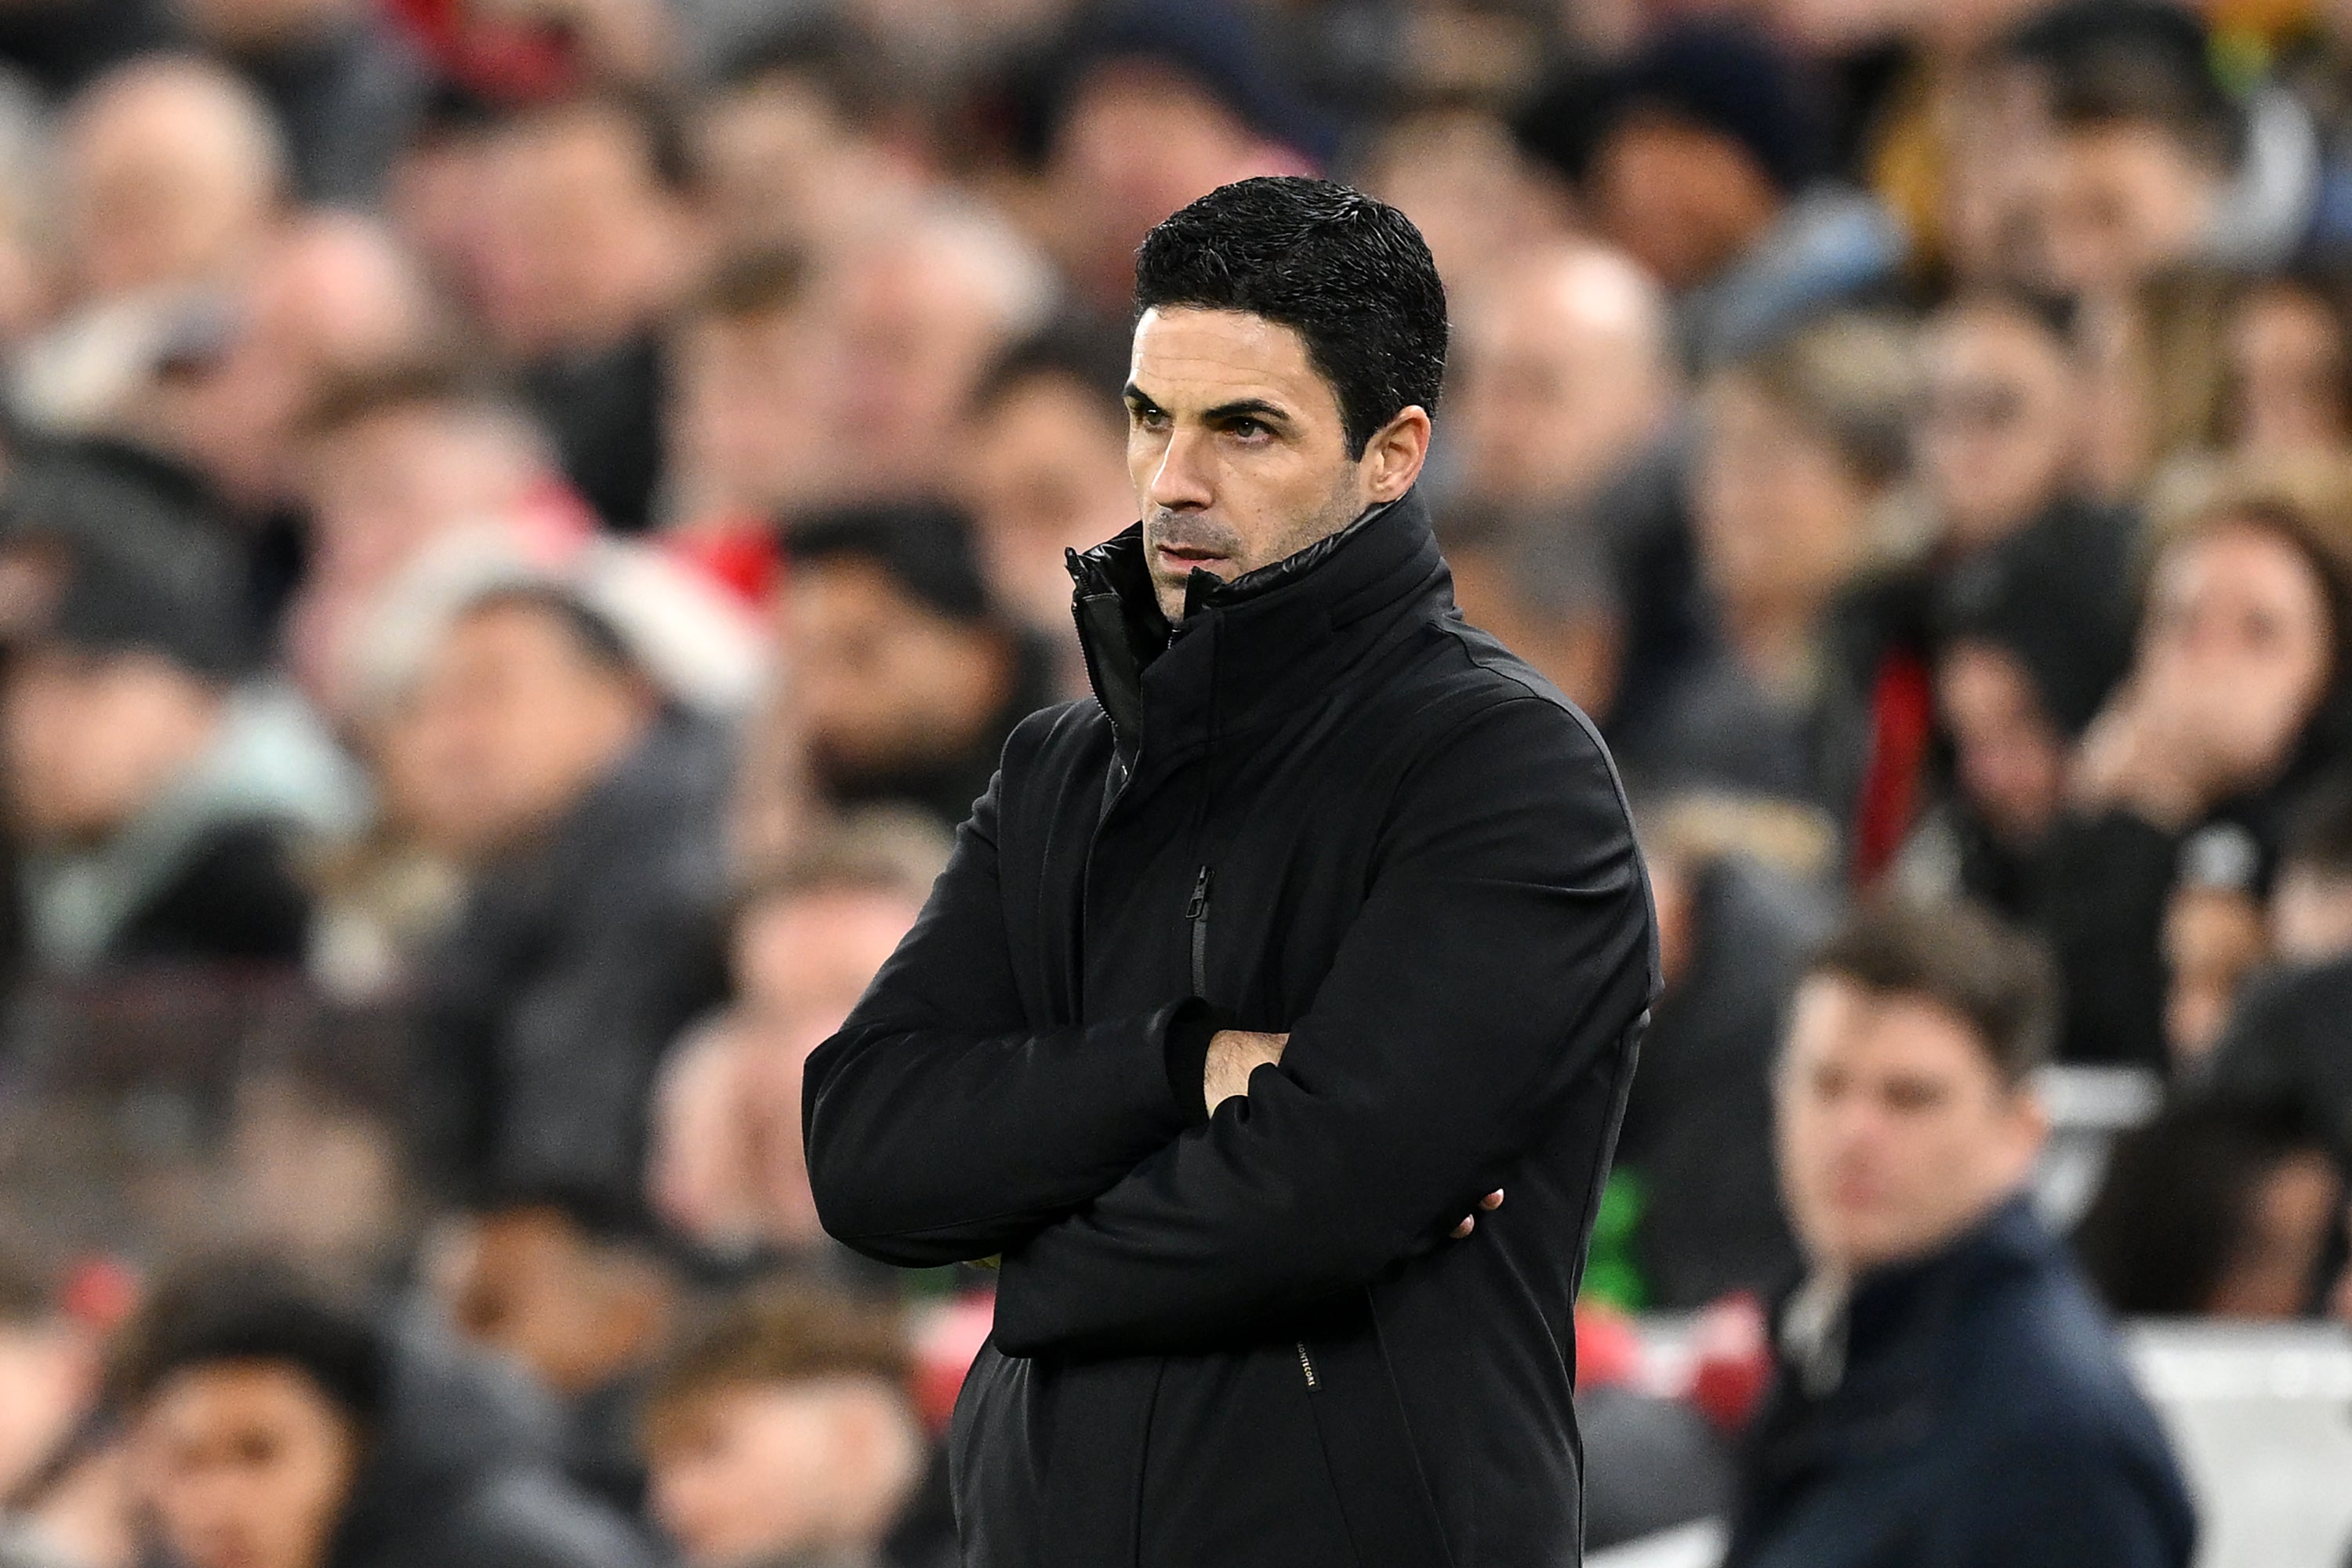 Mikel Arteta has vowed to stay with Arsenal